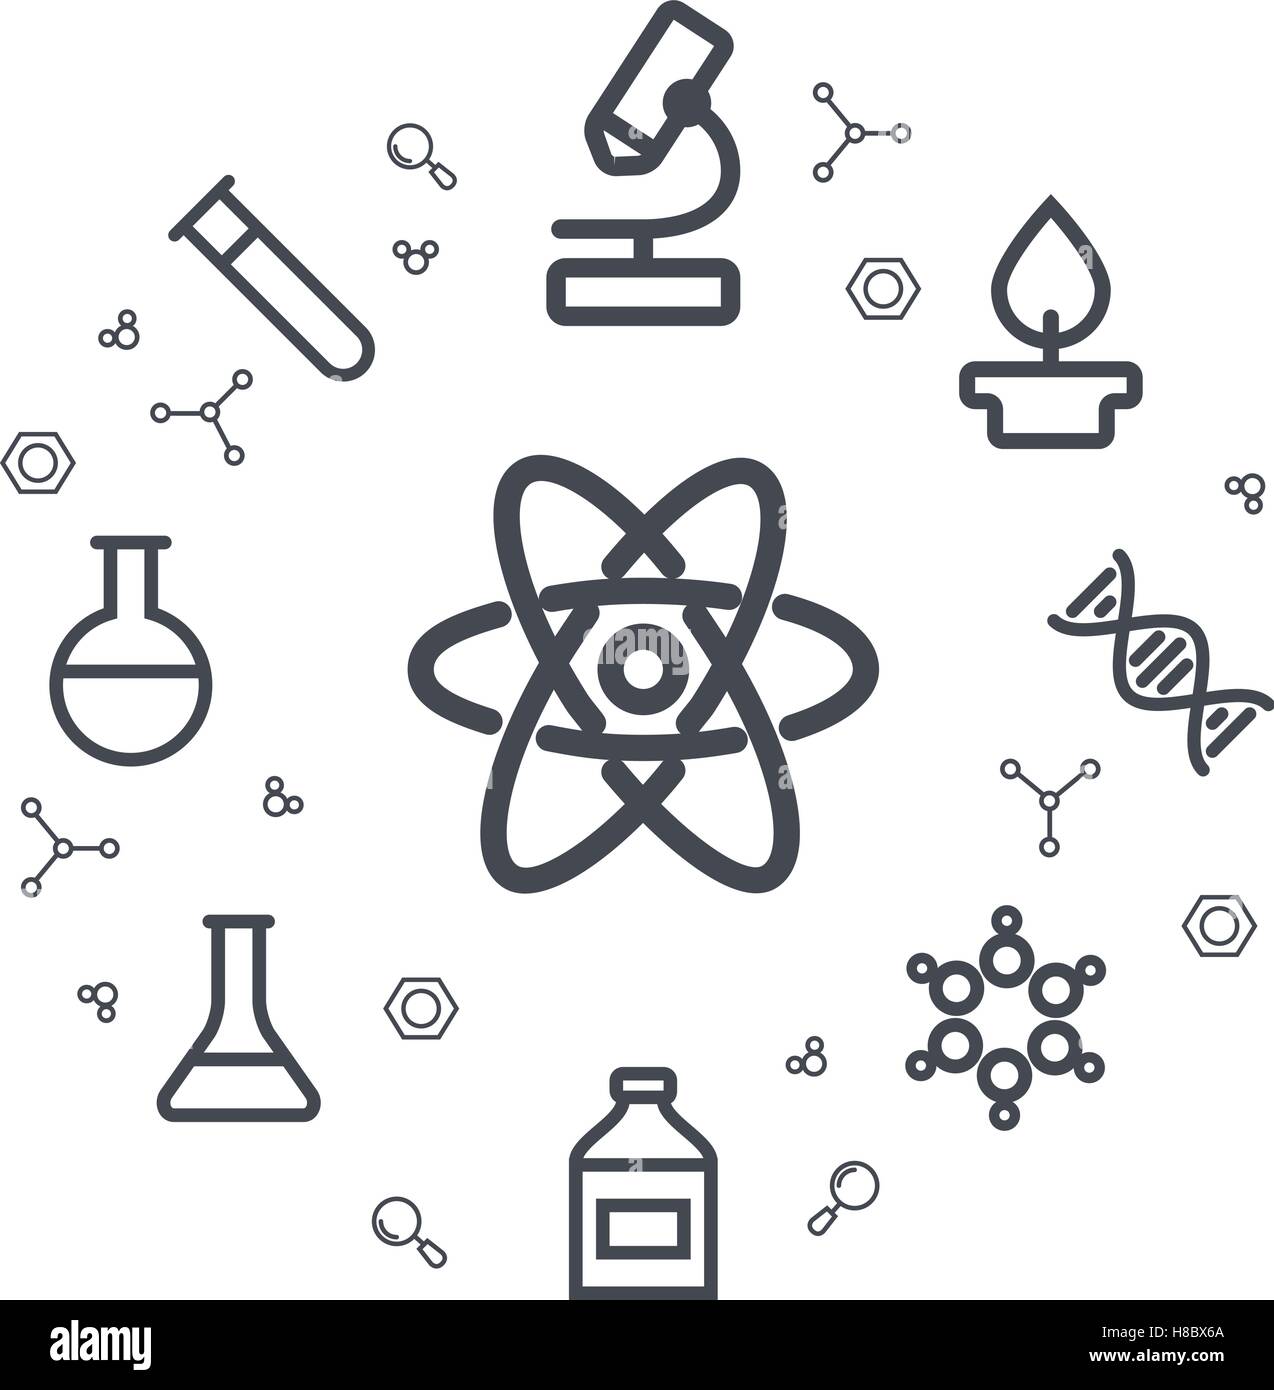 stock icons science